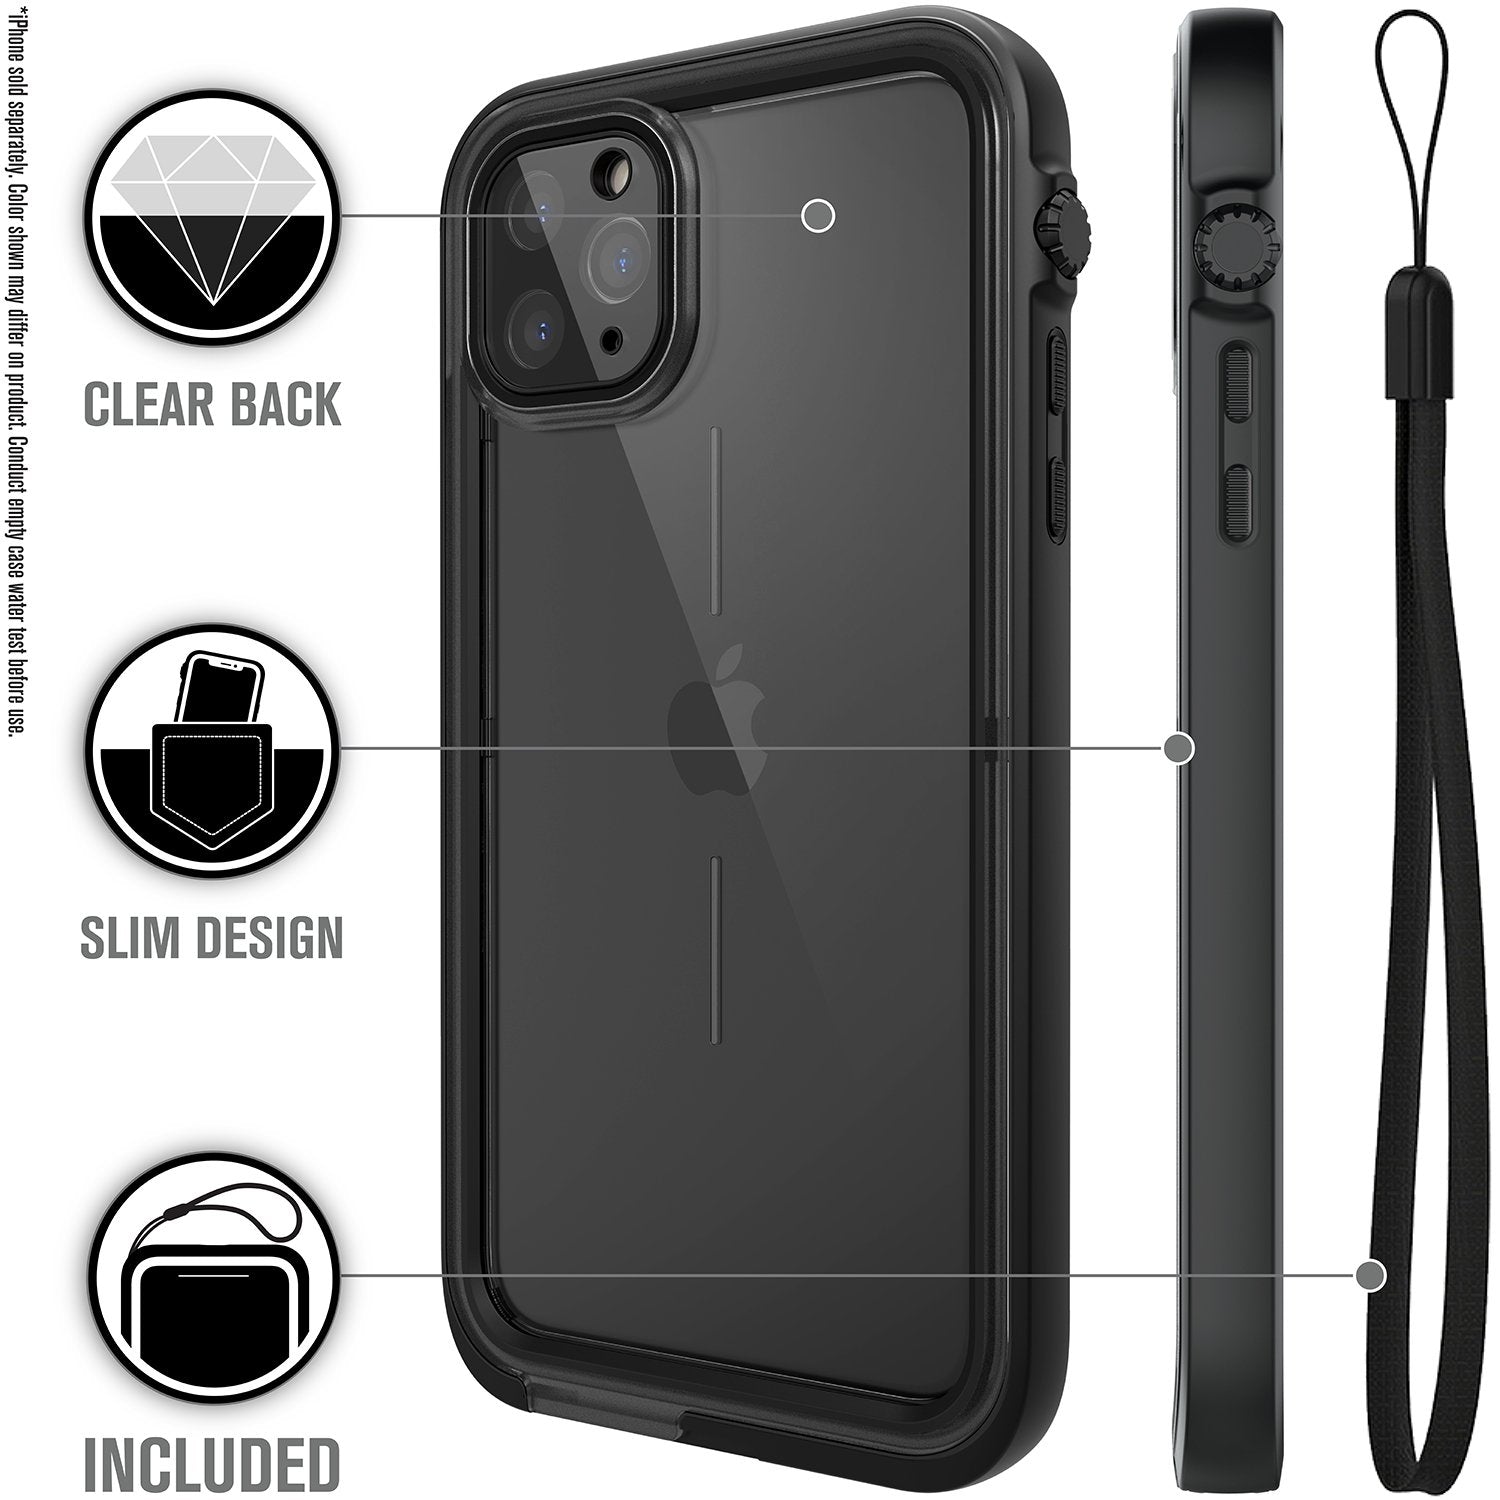 Catalyst iphone 11 pro max waterproof case showing the case design with lanyard in stealth black colorway text reads clear back slim design included